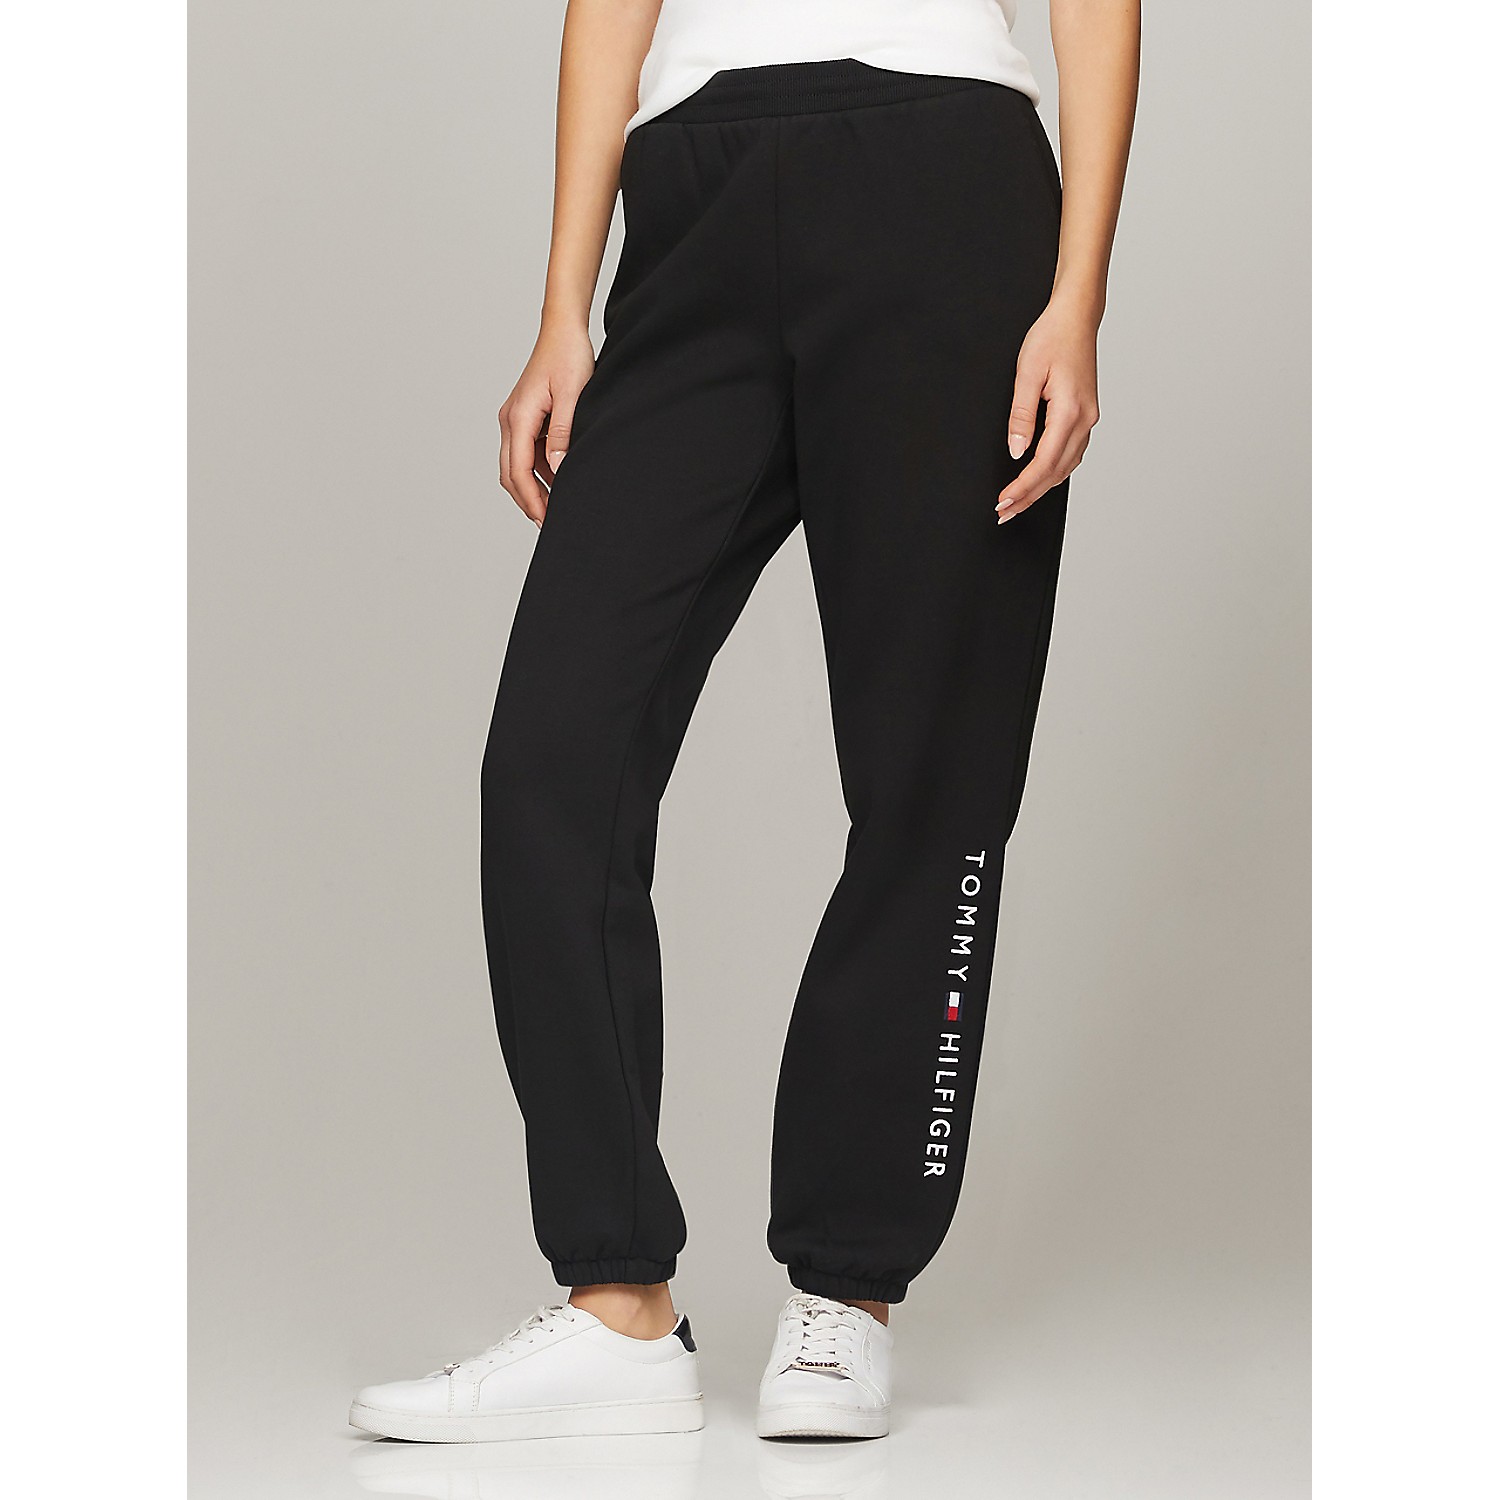 TOMMY HILFIGER Embroidered Tommy Logo Sweatpant